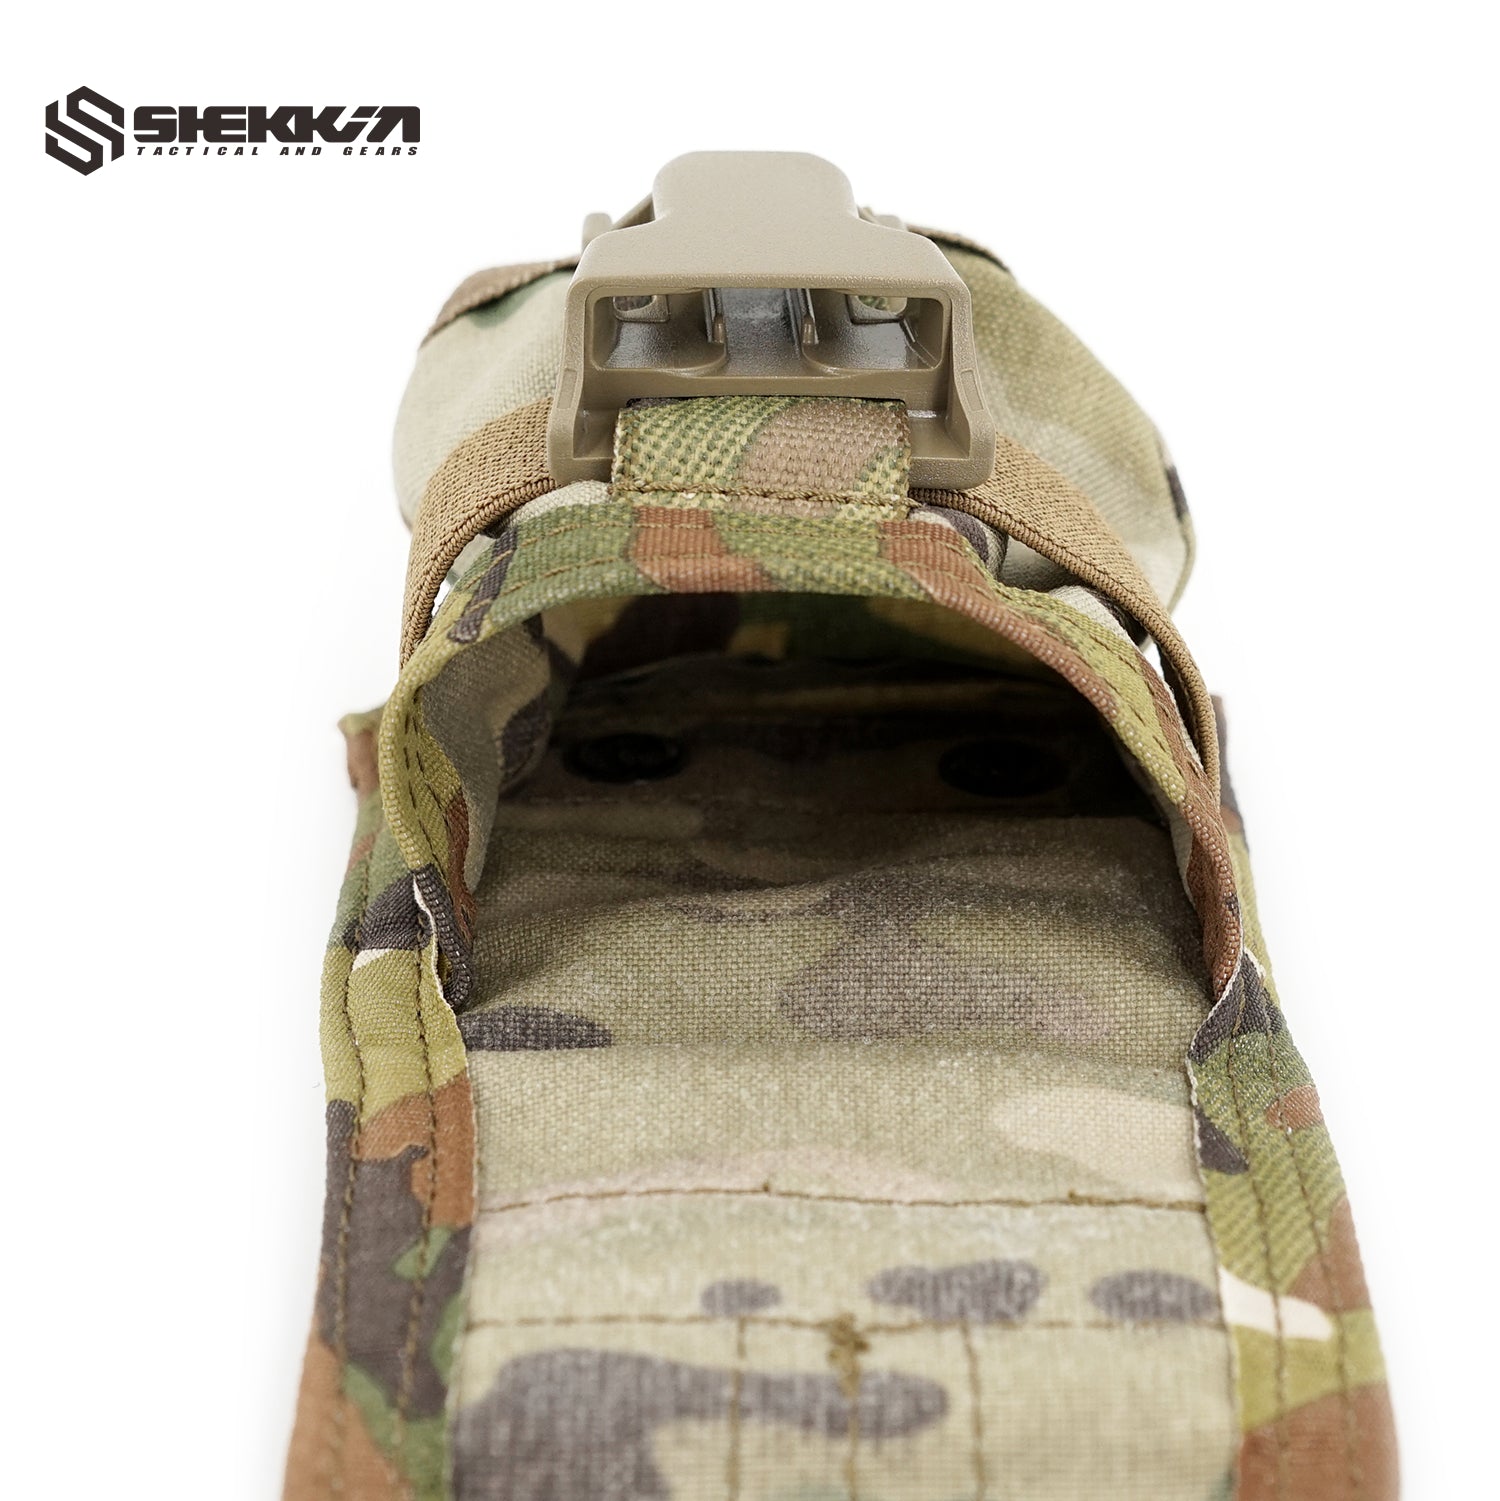 Thermobaric grenade pouch - Shekkin Gears